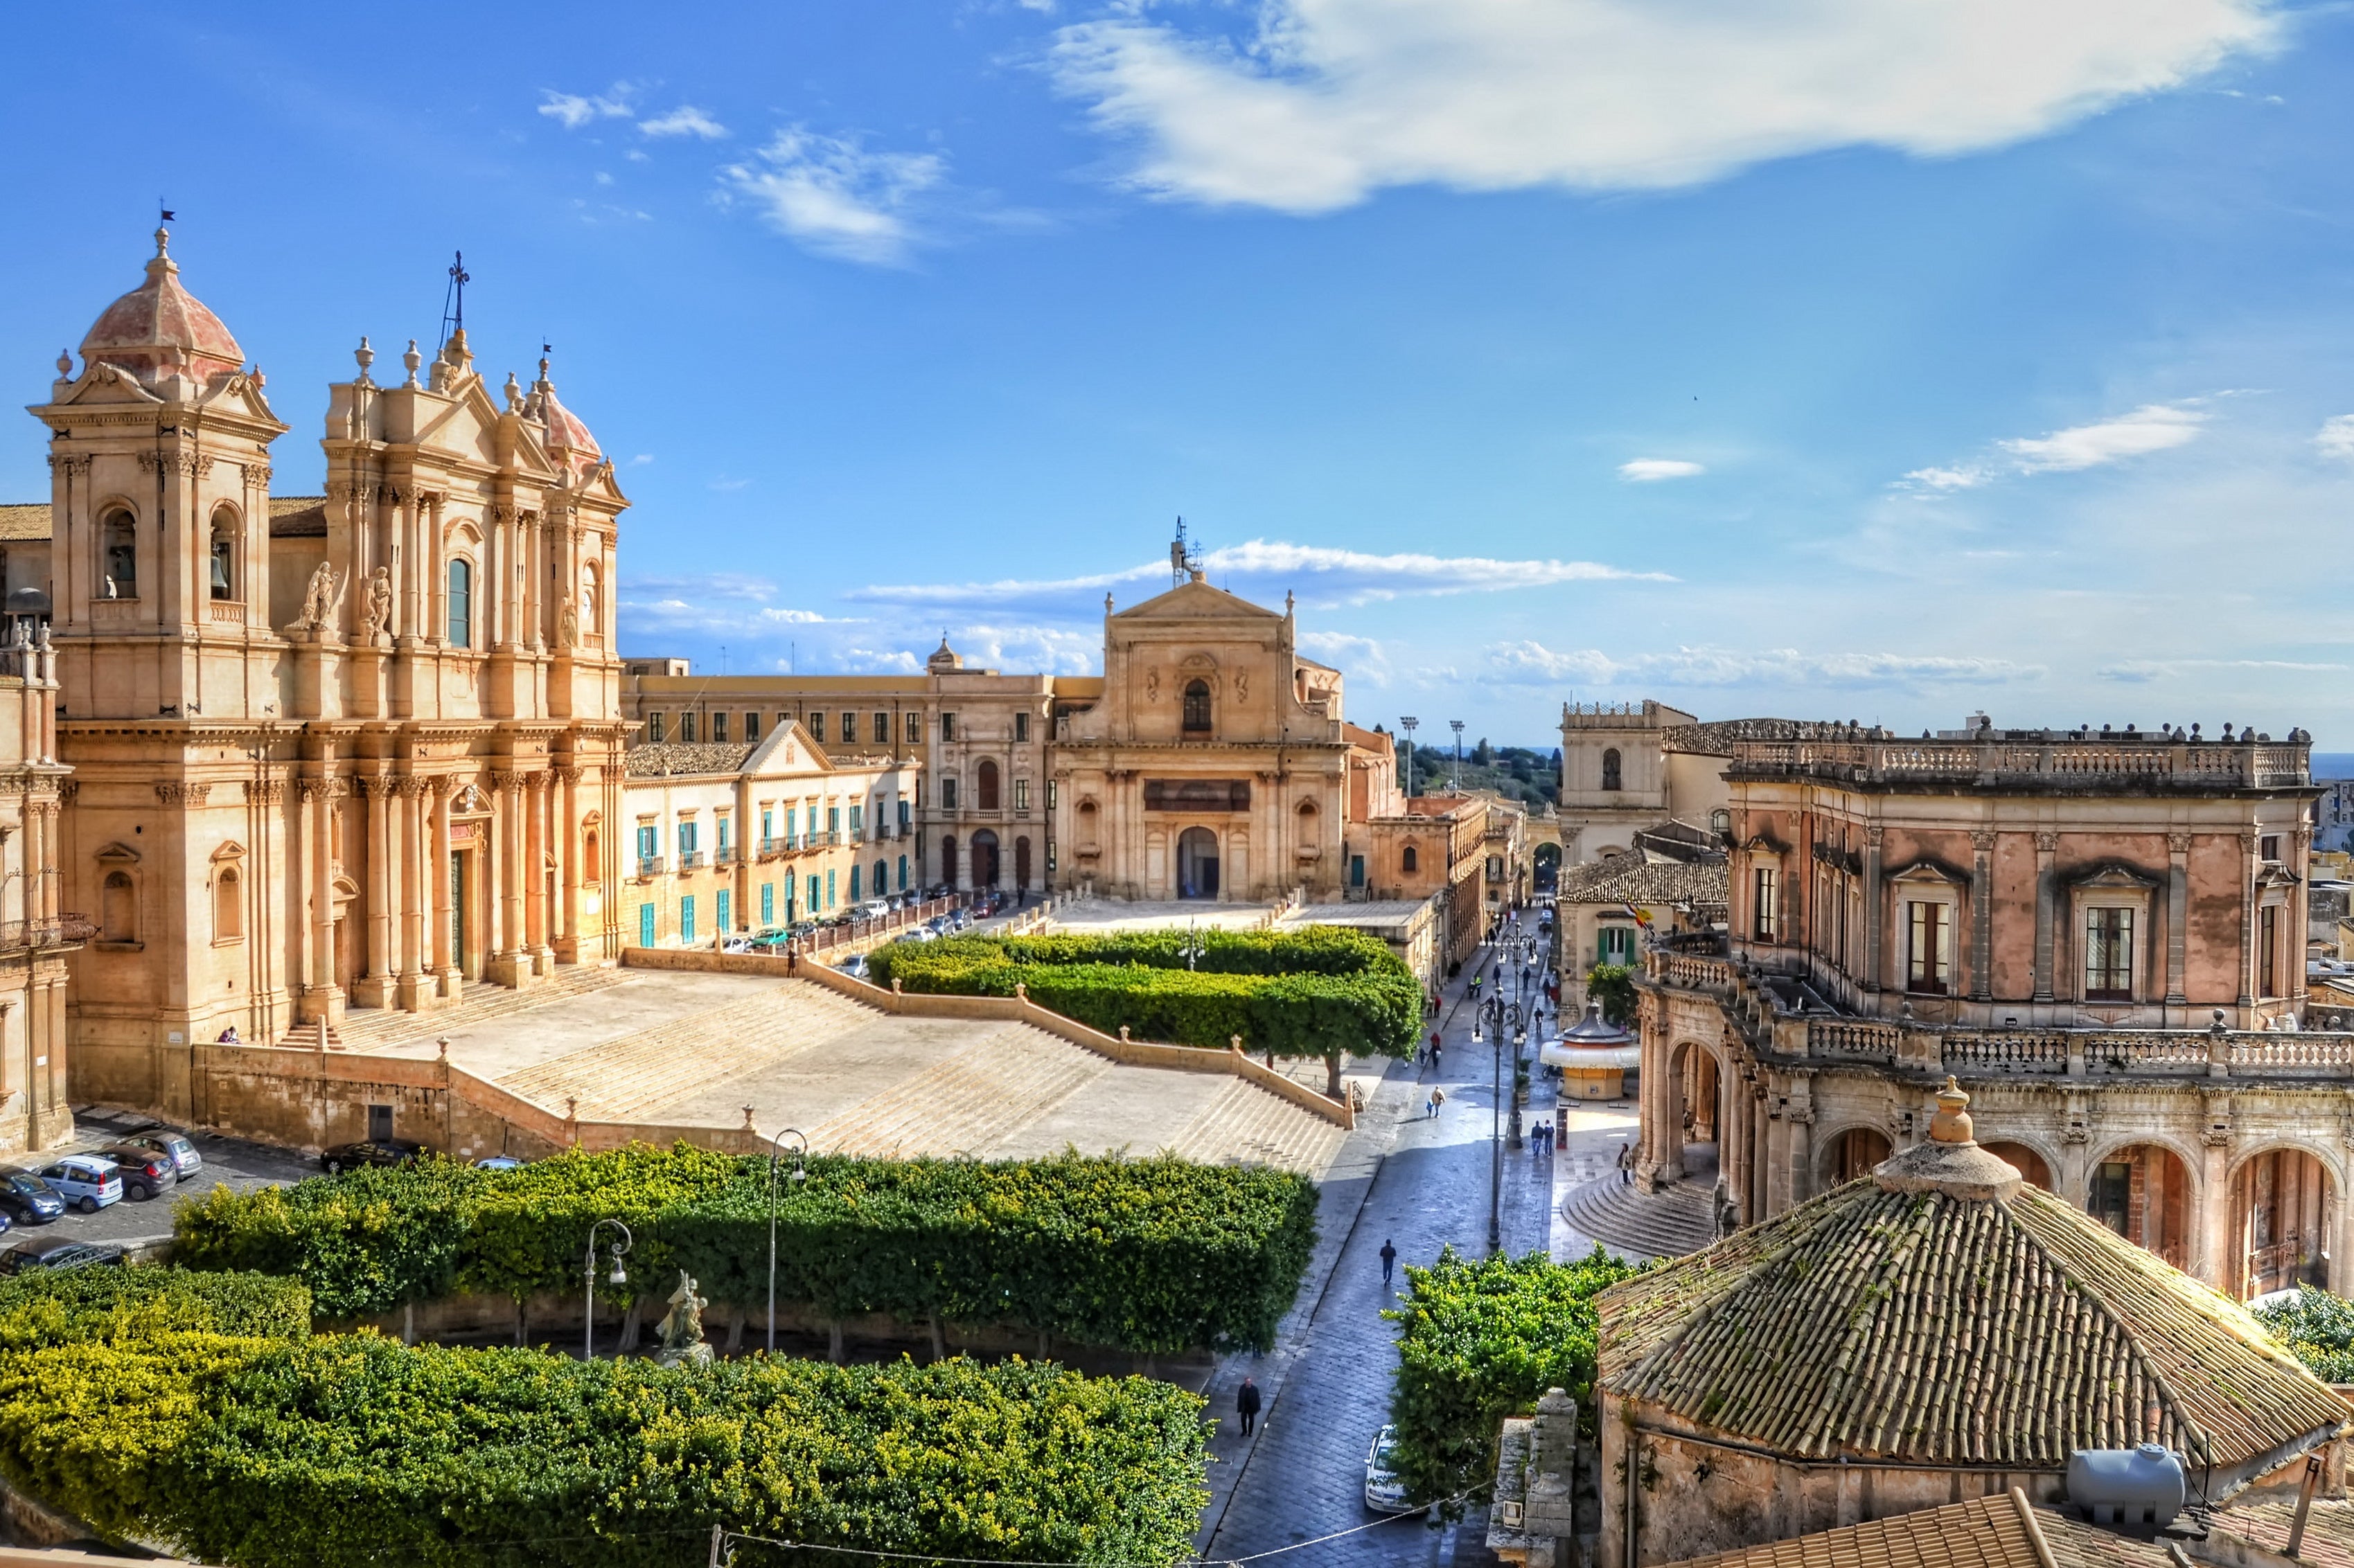 For unrivalled Baroque beauty, visit Noto